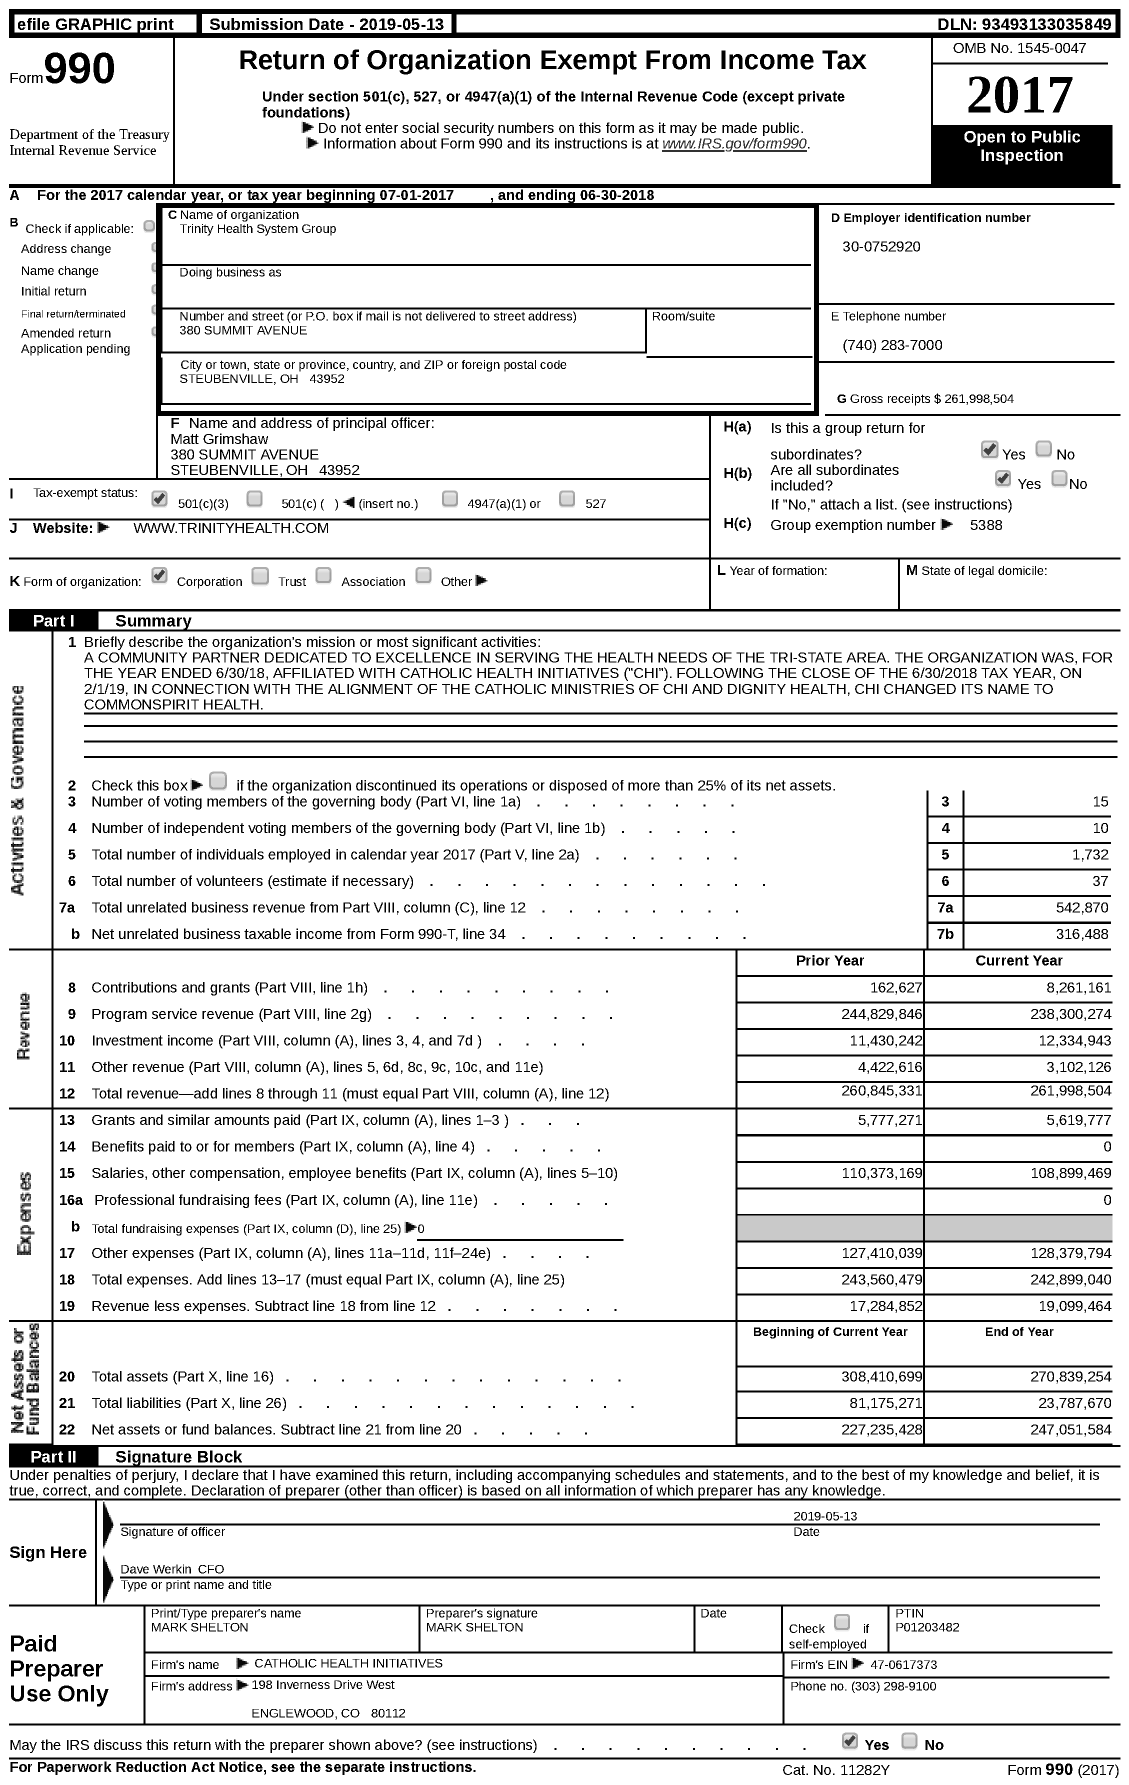 Image of first page of 2017 Form 990 for Trinity Health System Group